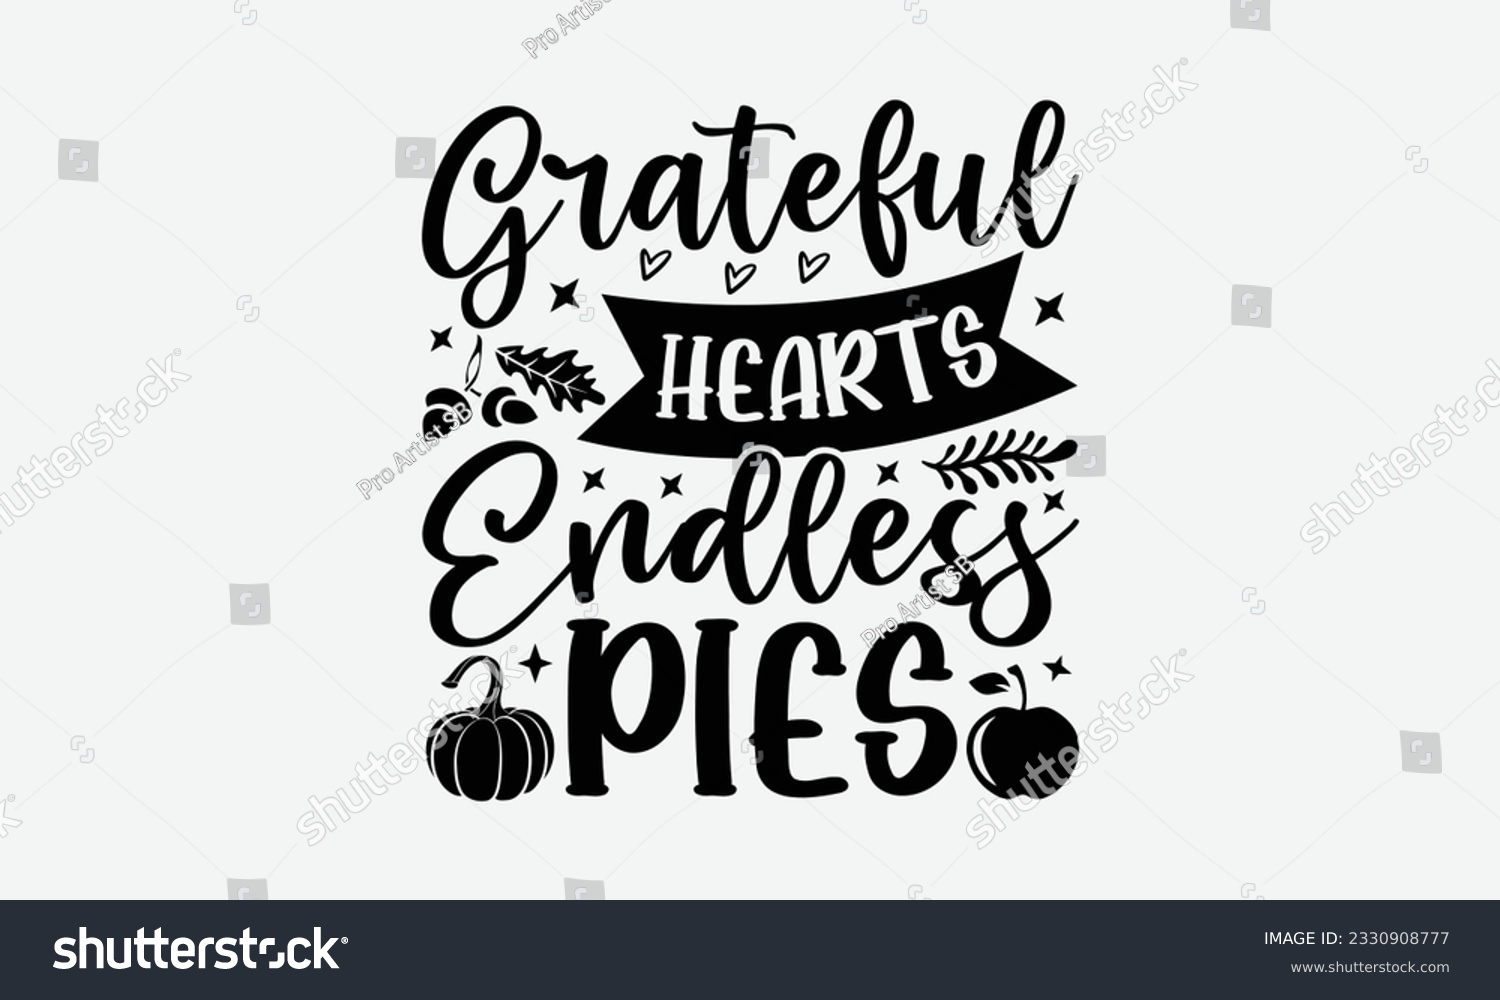 SVG of Grateful Hearts Endless Pies - Thanksgiving T-shirt Design Template, Thanksgiving Quotes File, Hand Drawn Lettering Phrase, SVG Files for Cutting Cricut and Silhouette. svg